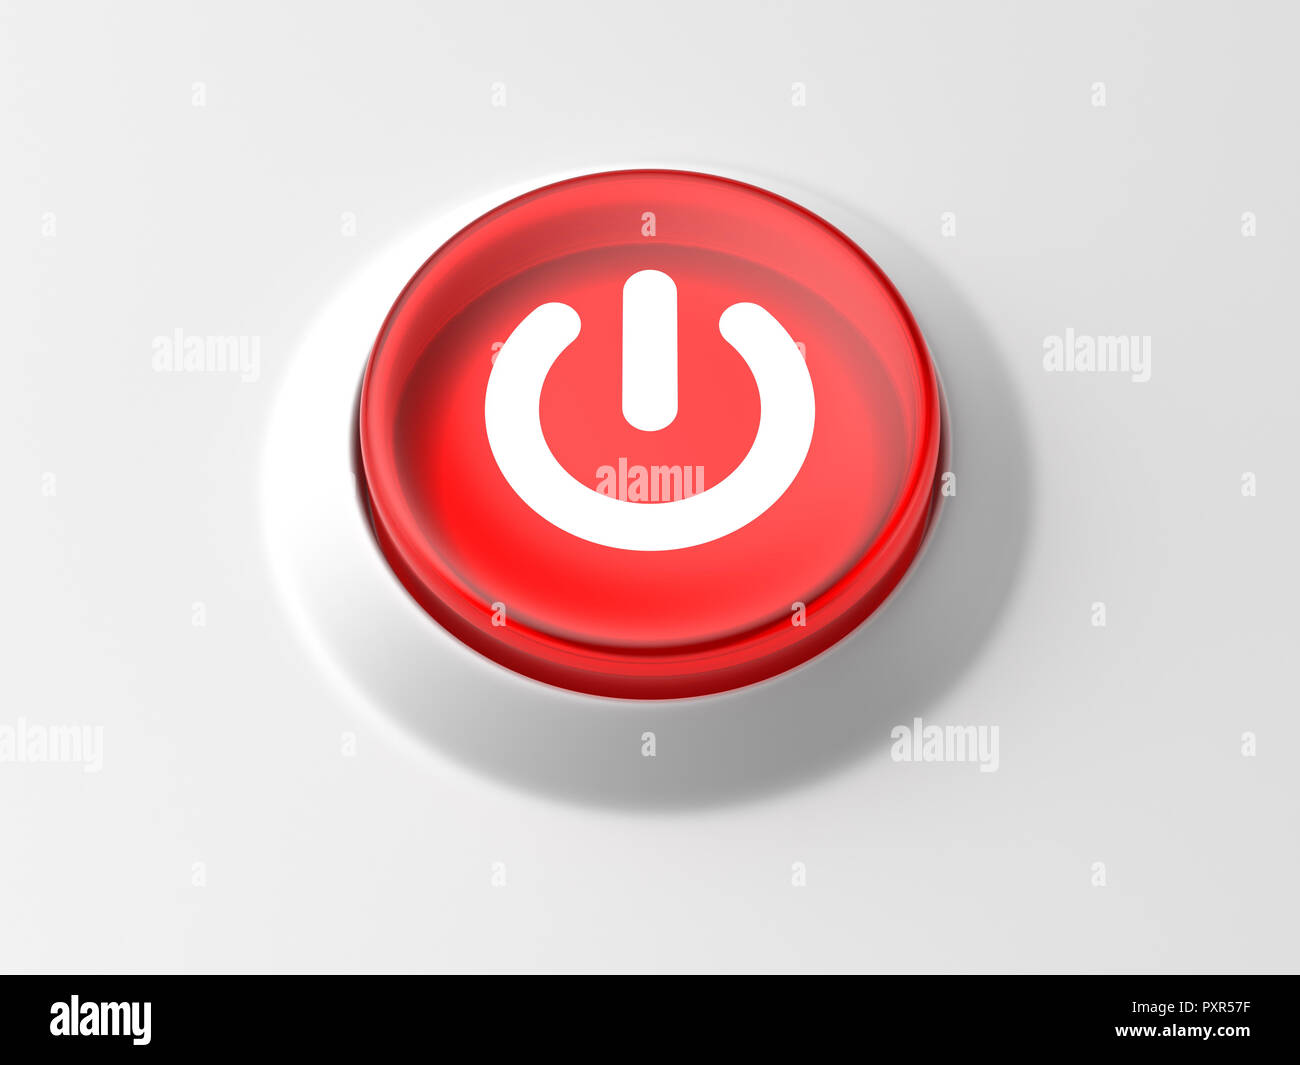 3d rendered angled view of a glowing red power button on a white background. Stock Photo